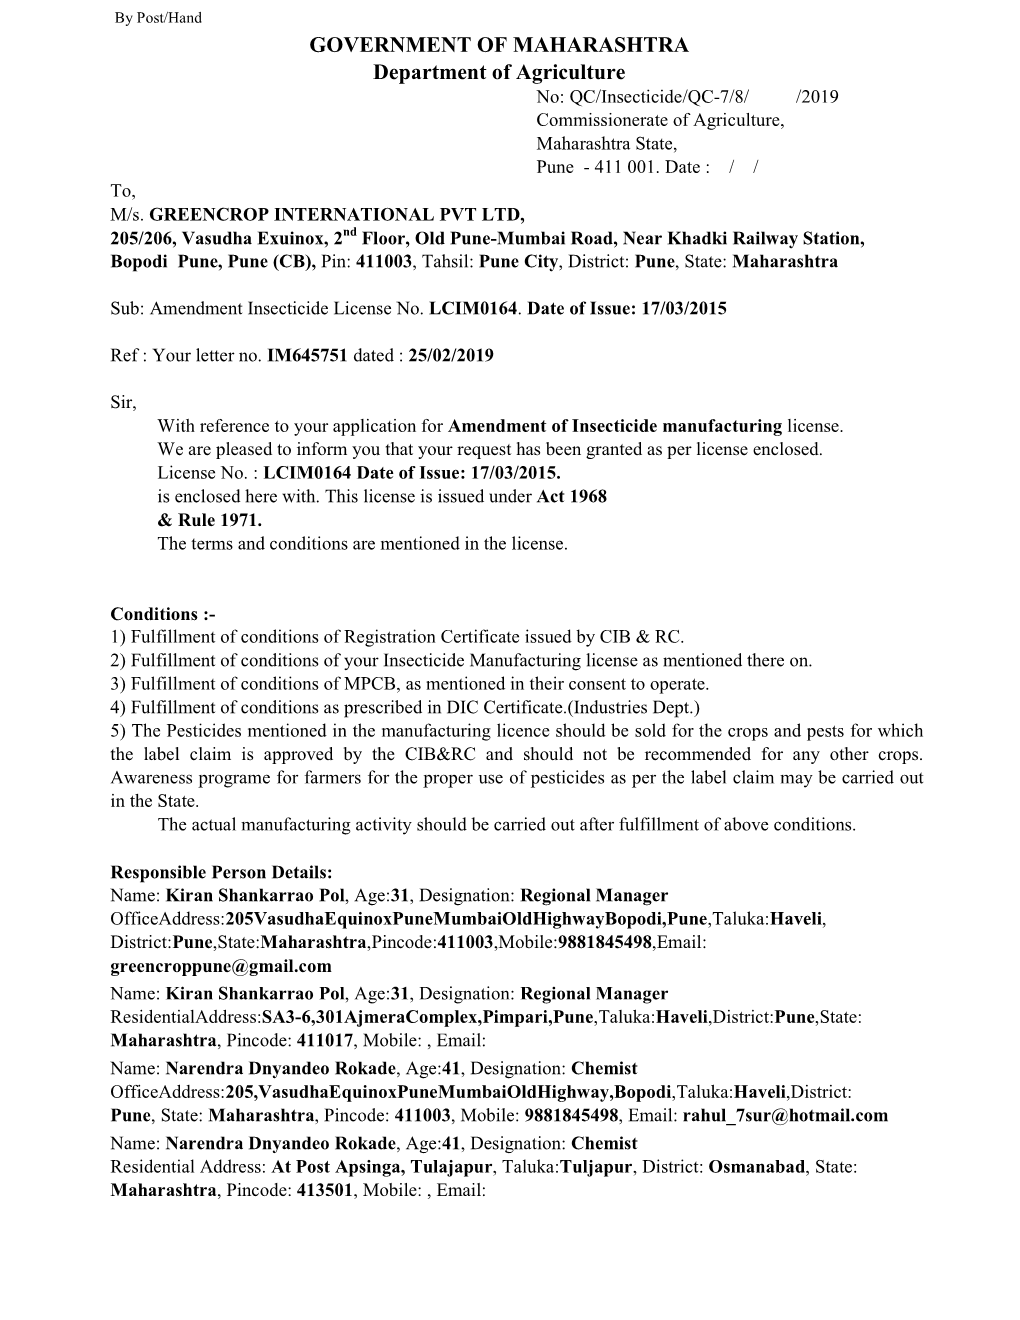 GOVERNMENT of MAHARASHTRA Department of Agriculture No: QC/Insecticide/QC-7/8/ /2019